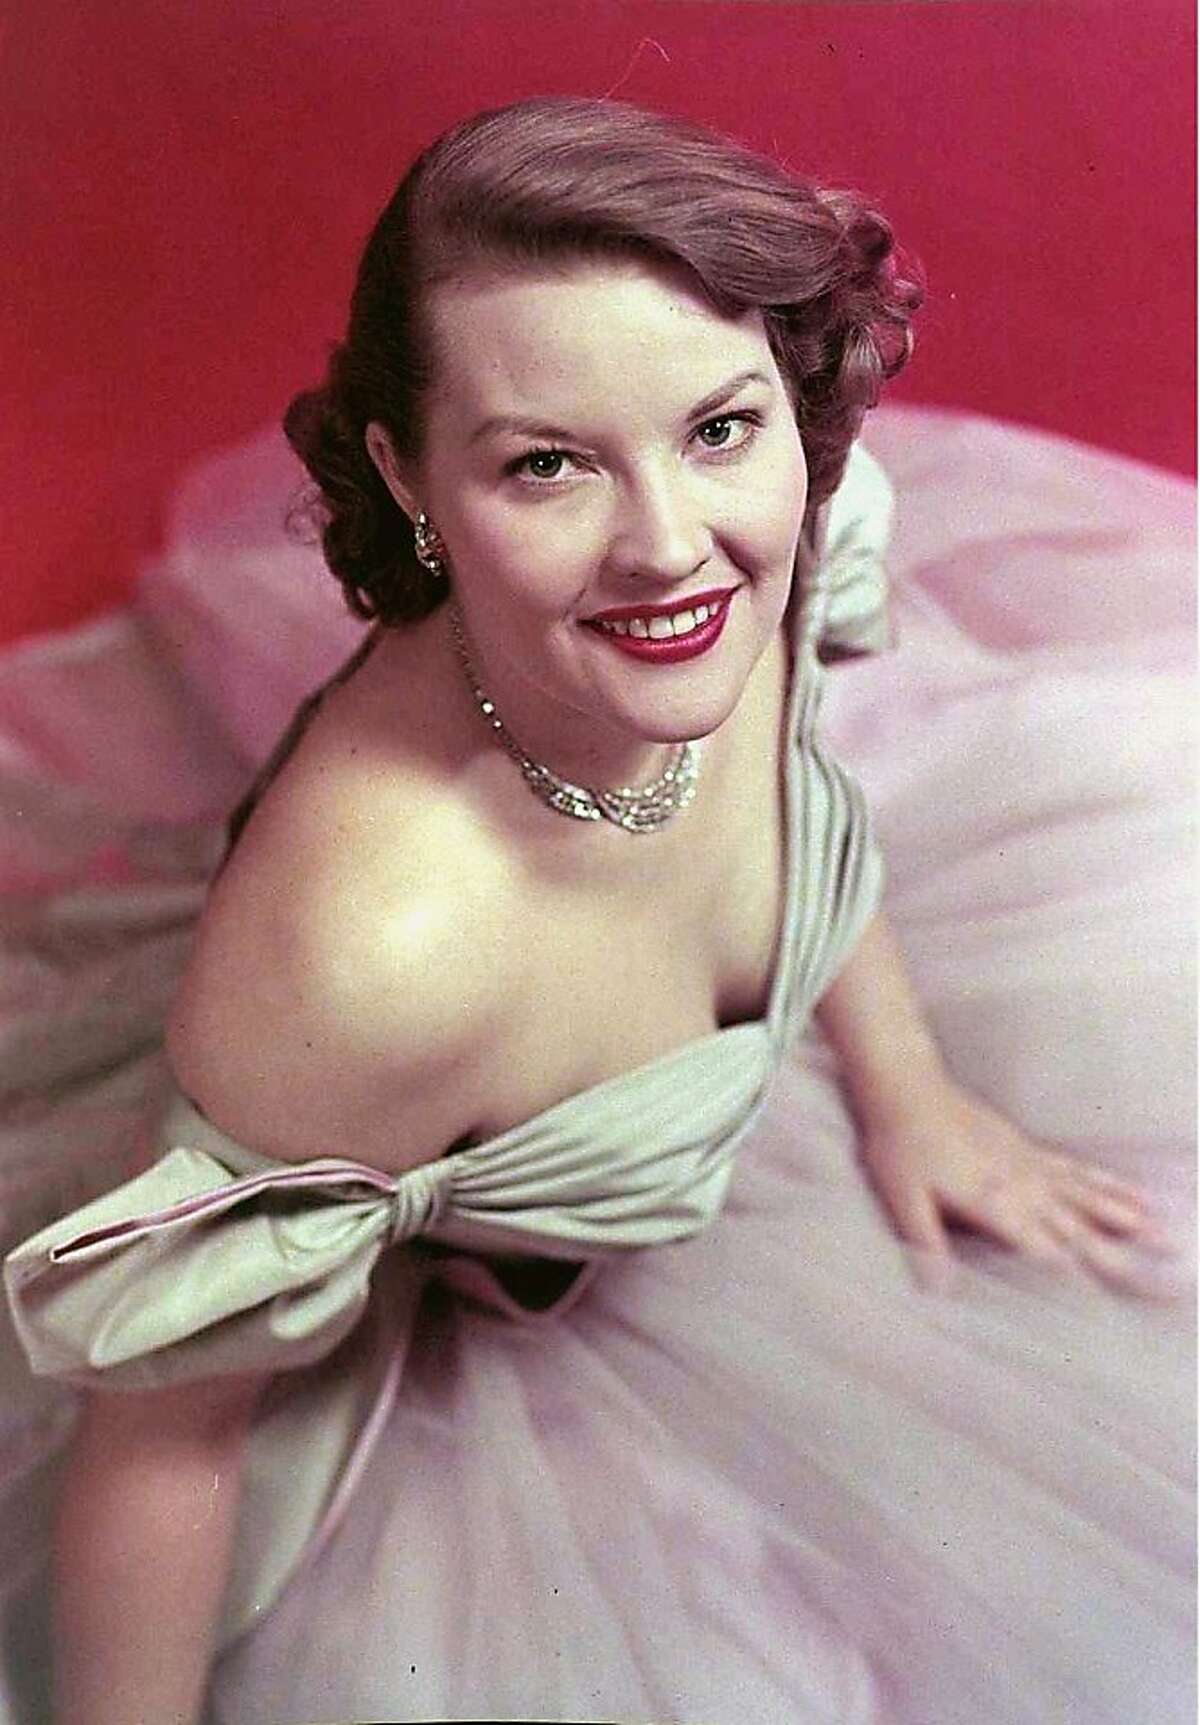 Singer Patti Page Dies At The Age of 85: Portrait of American popular music singer Patti Page, late 1940s. The owner of a sweet and lilting voice, Page got her start on a radio program sponsored by the Page Milk Company, hence her surname. She was signed by Mercury records in the late 1940s. Page was later the host of her own television show.